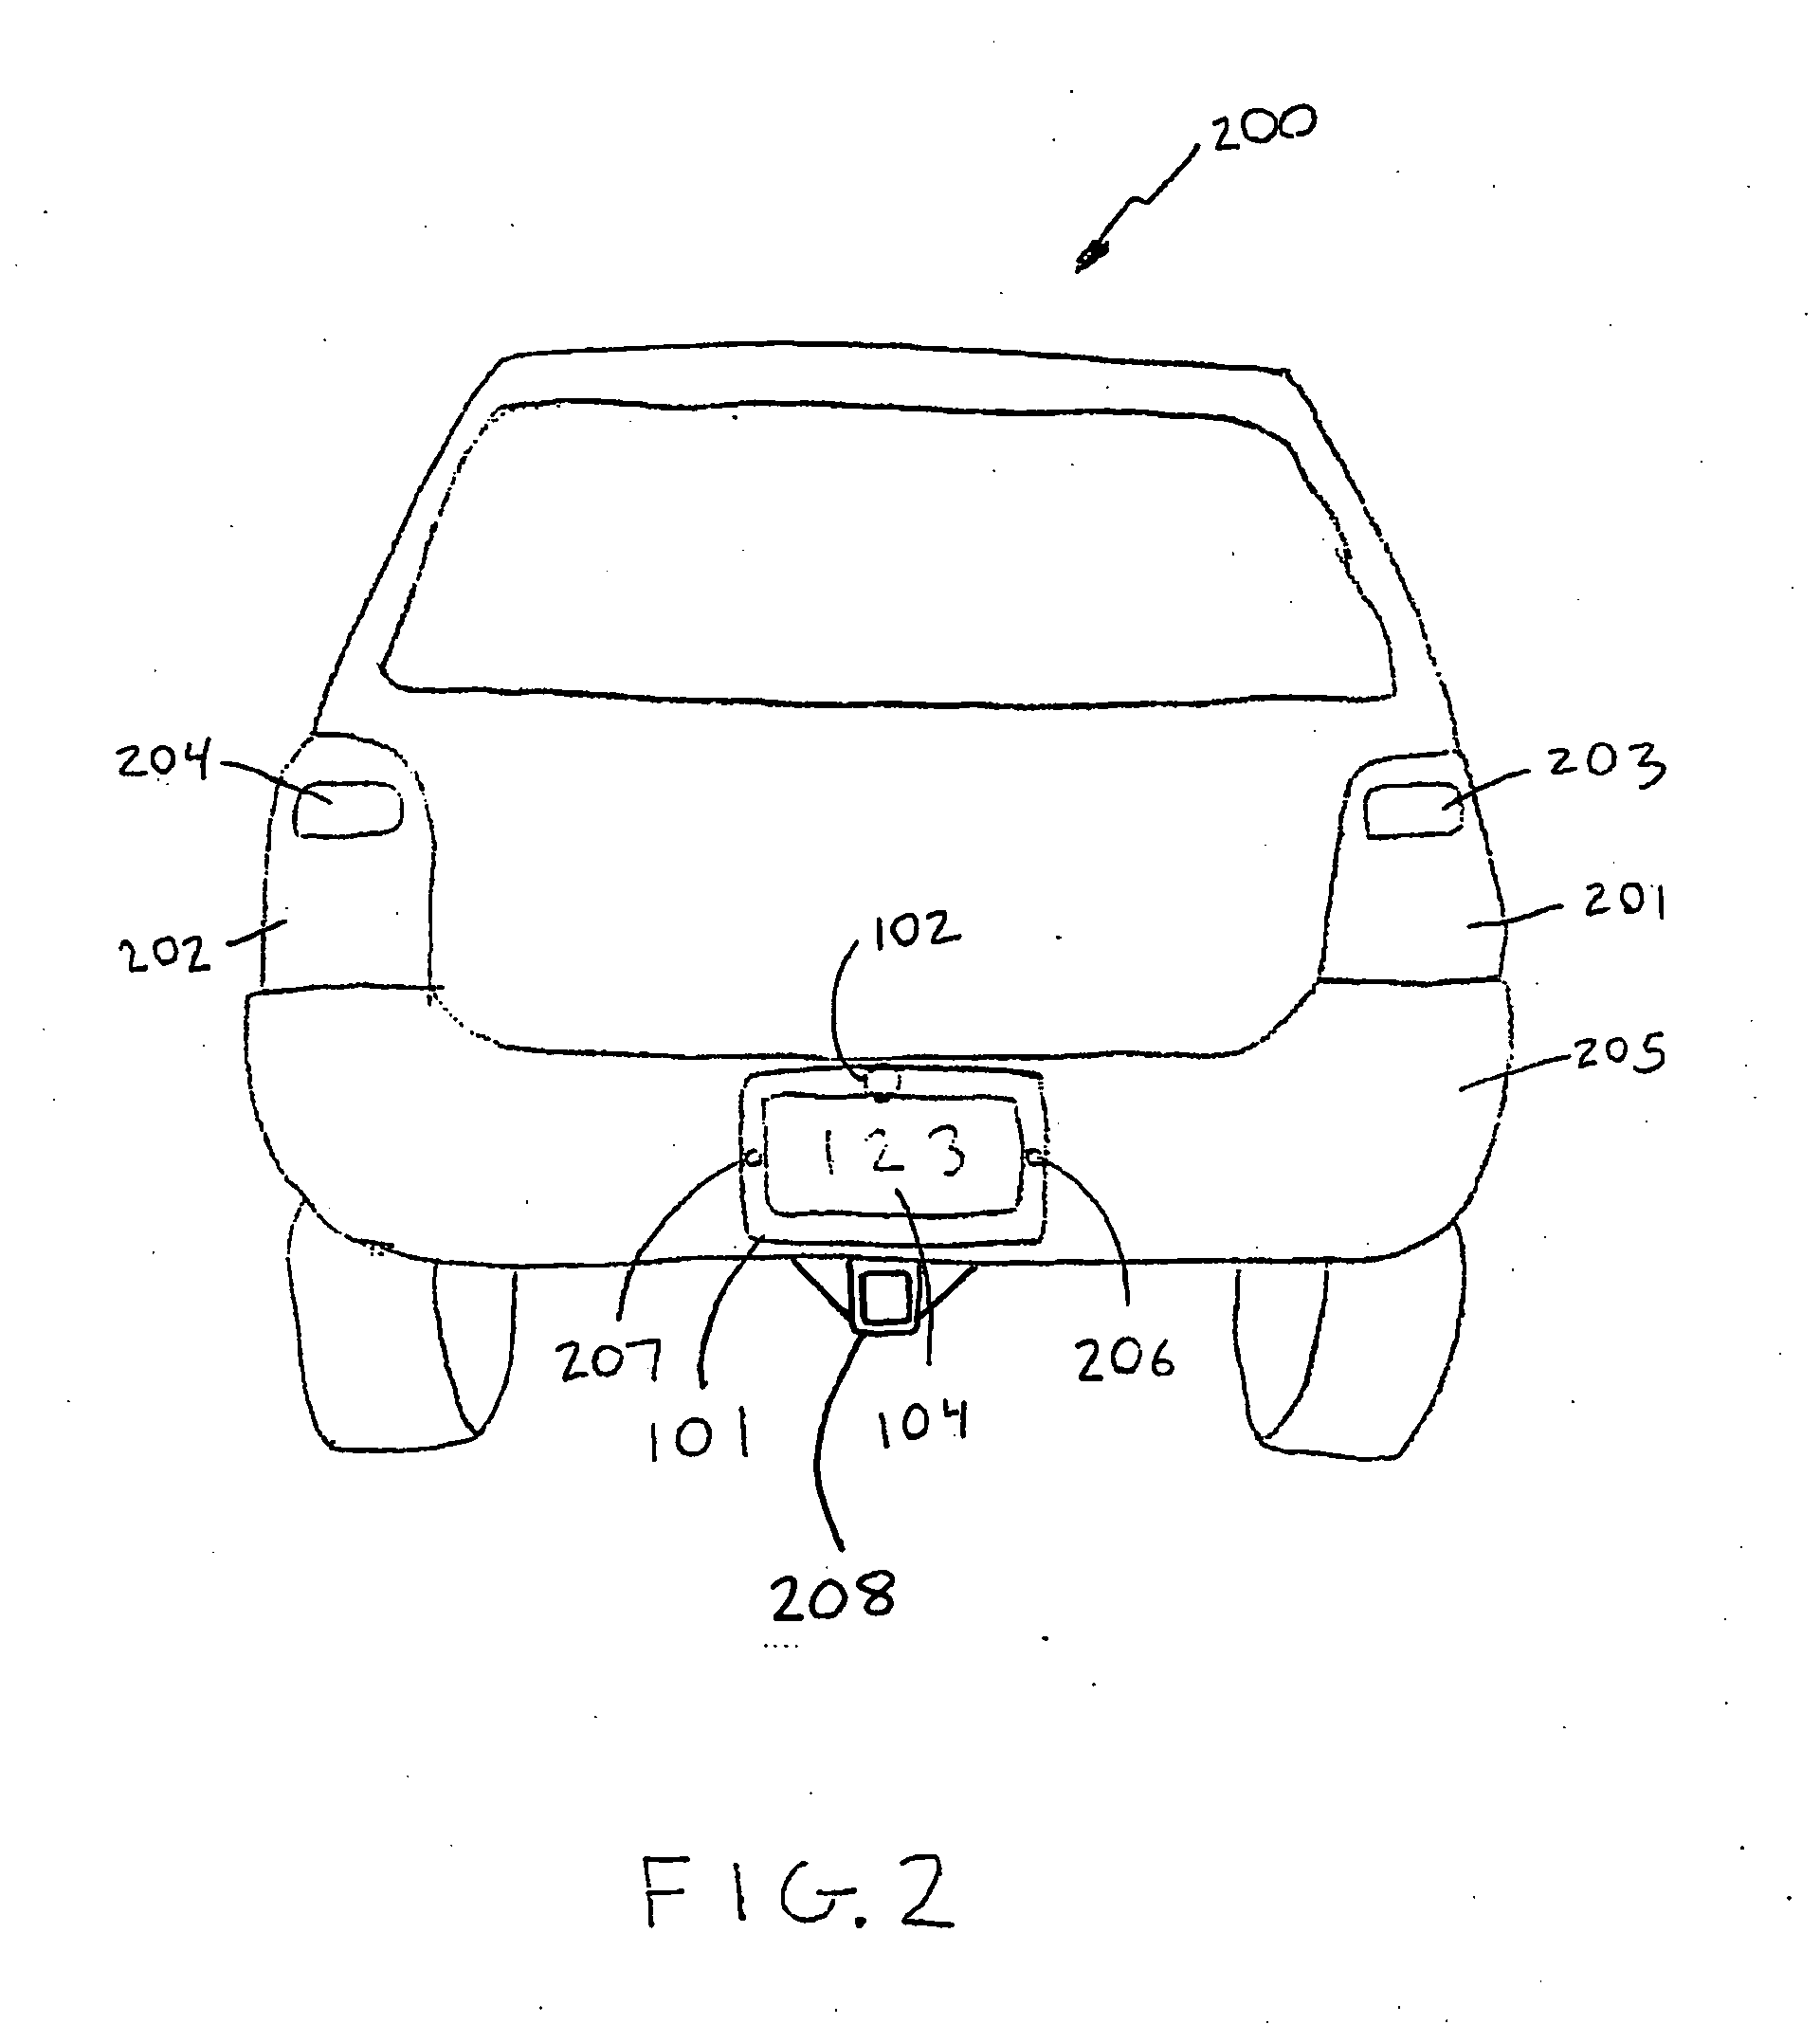 Vehicle back-up viewing system